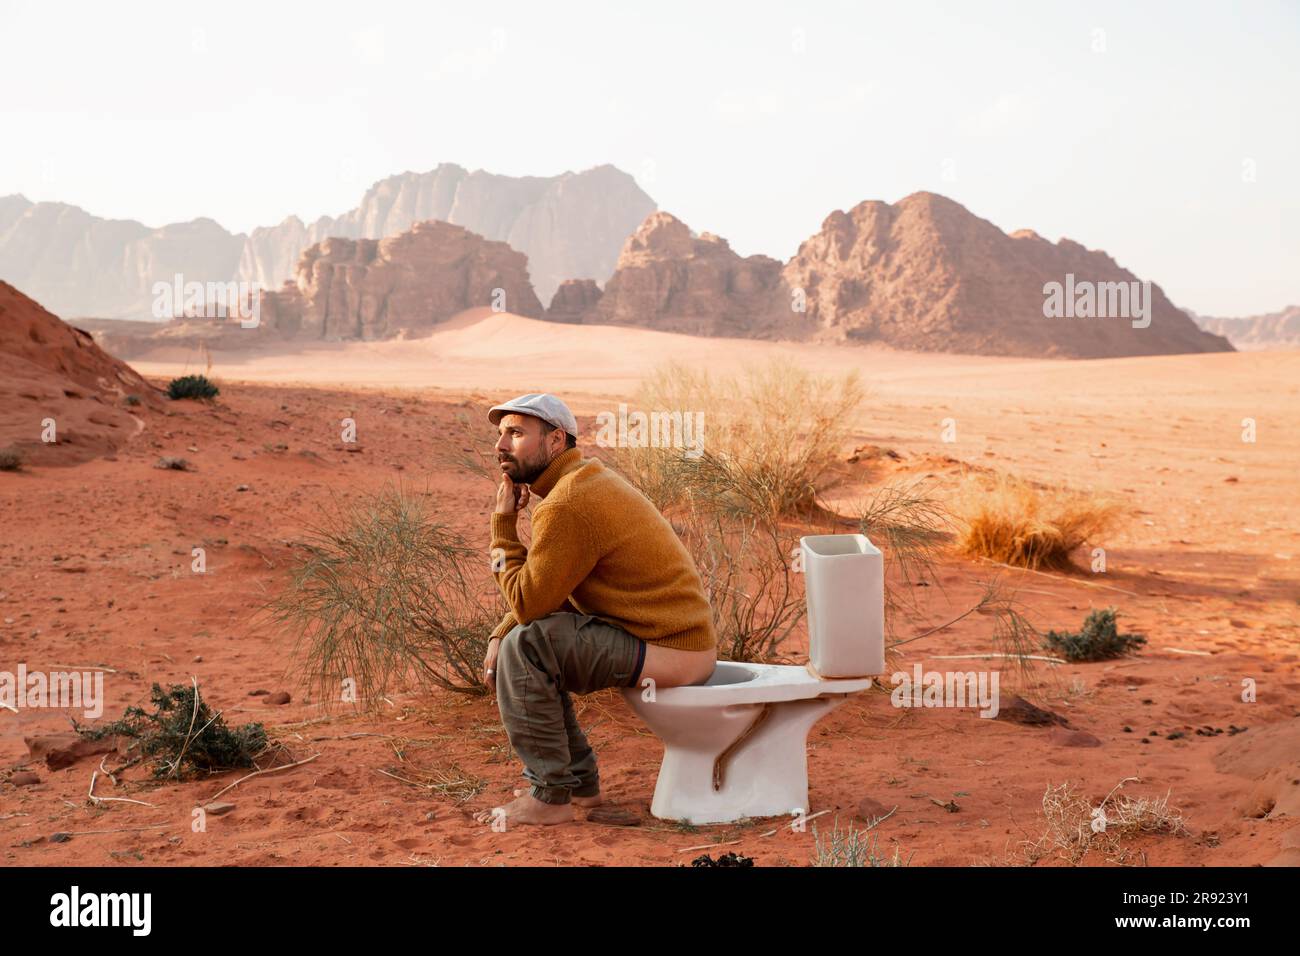 Contemplative man sitting on toilet seat and defecating in desert Stock Photo